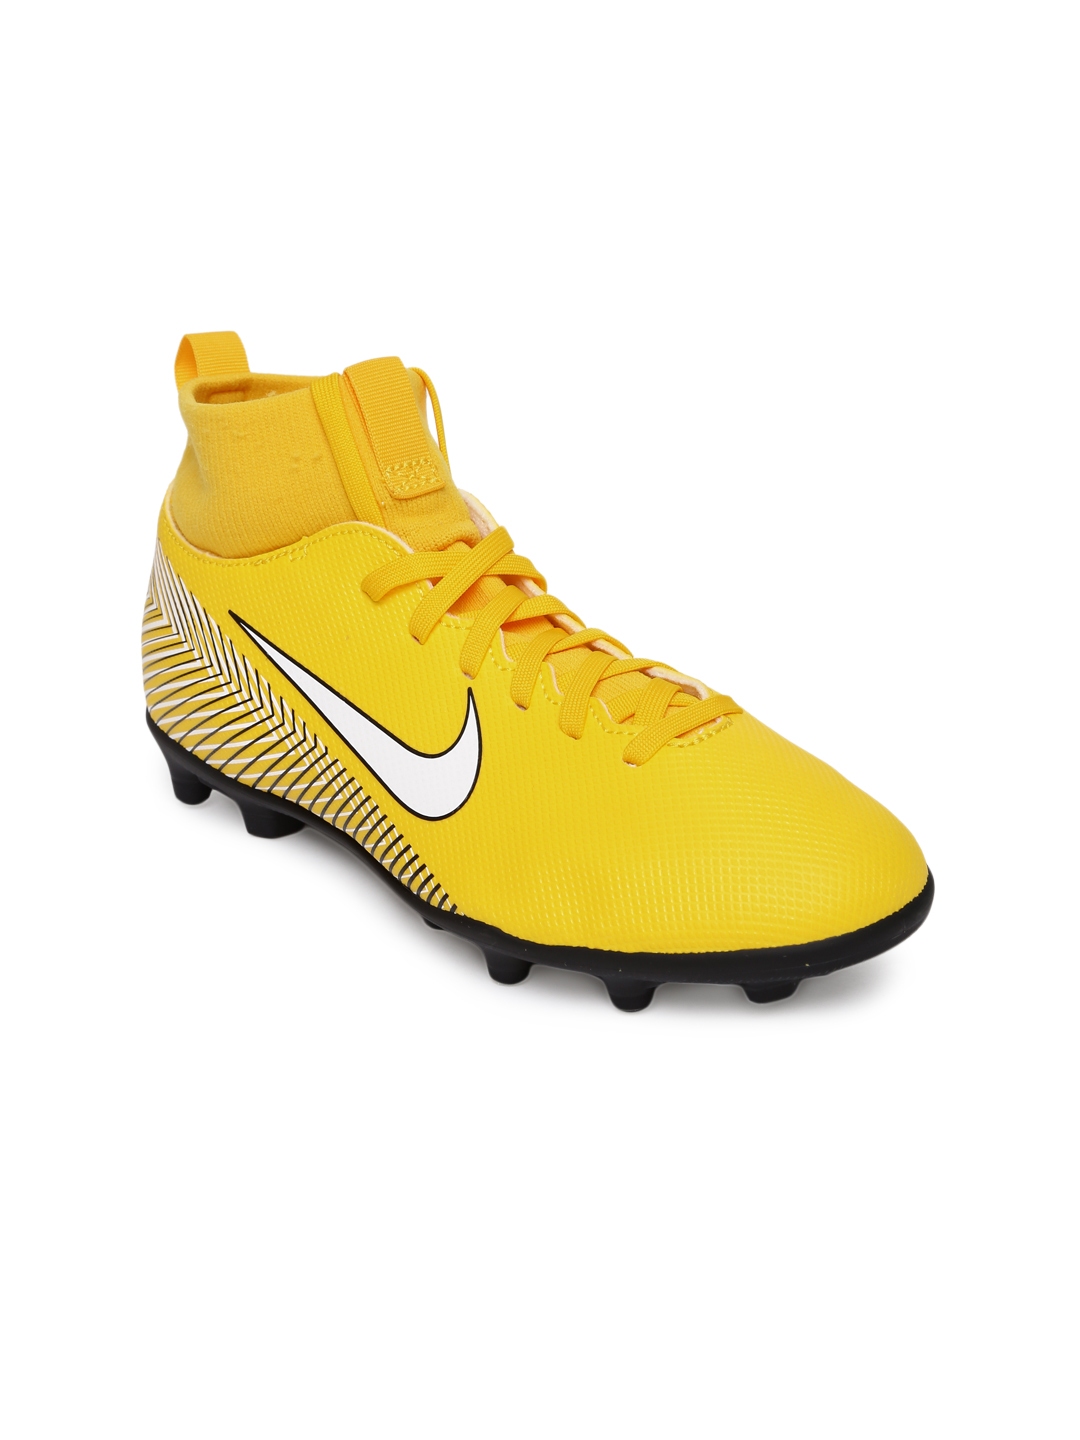 Nike JUNIOR Mercurial Superfly 6 Academy GS CR7 Shoes.